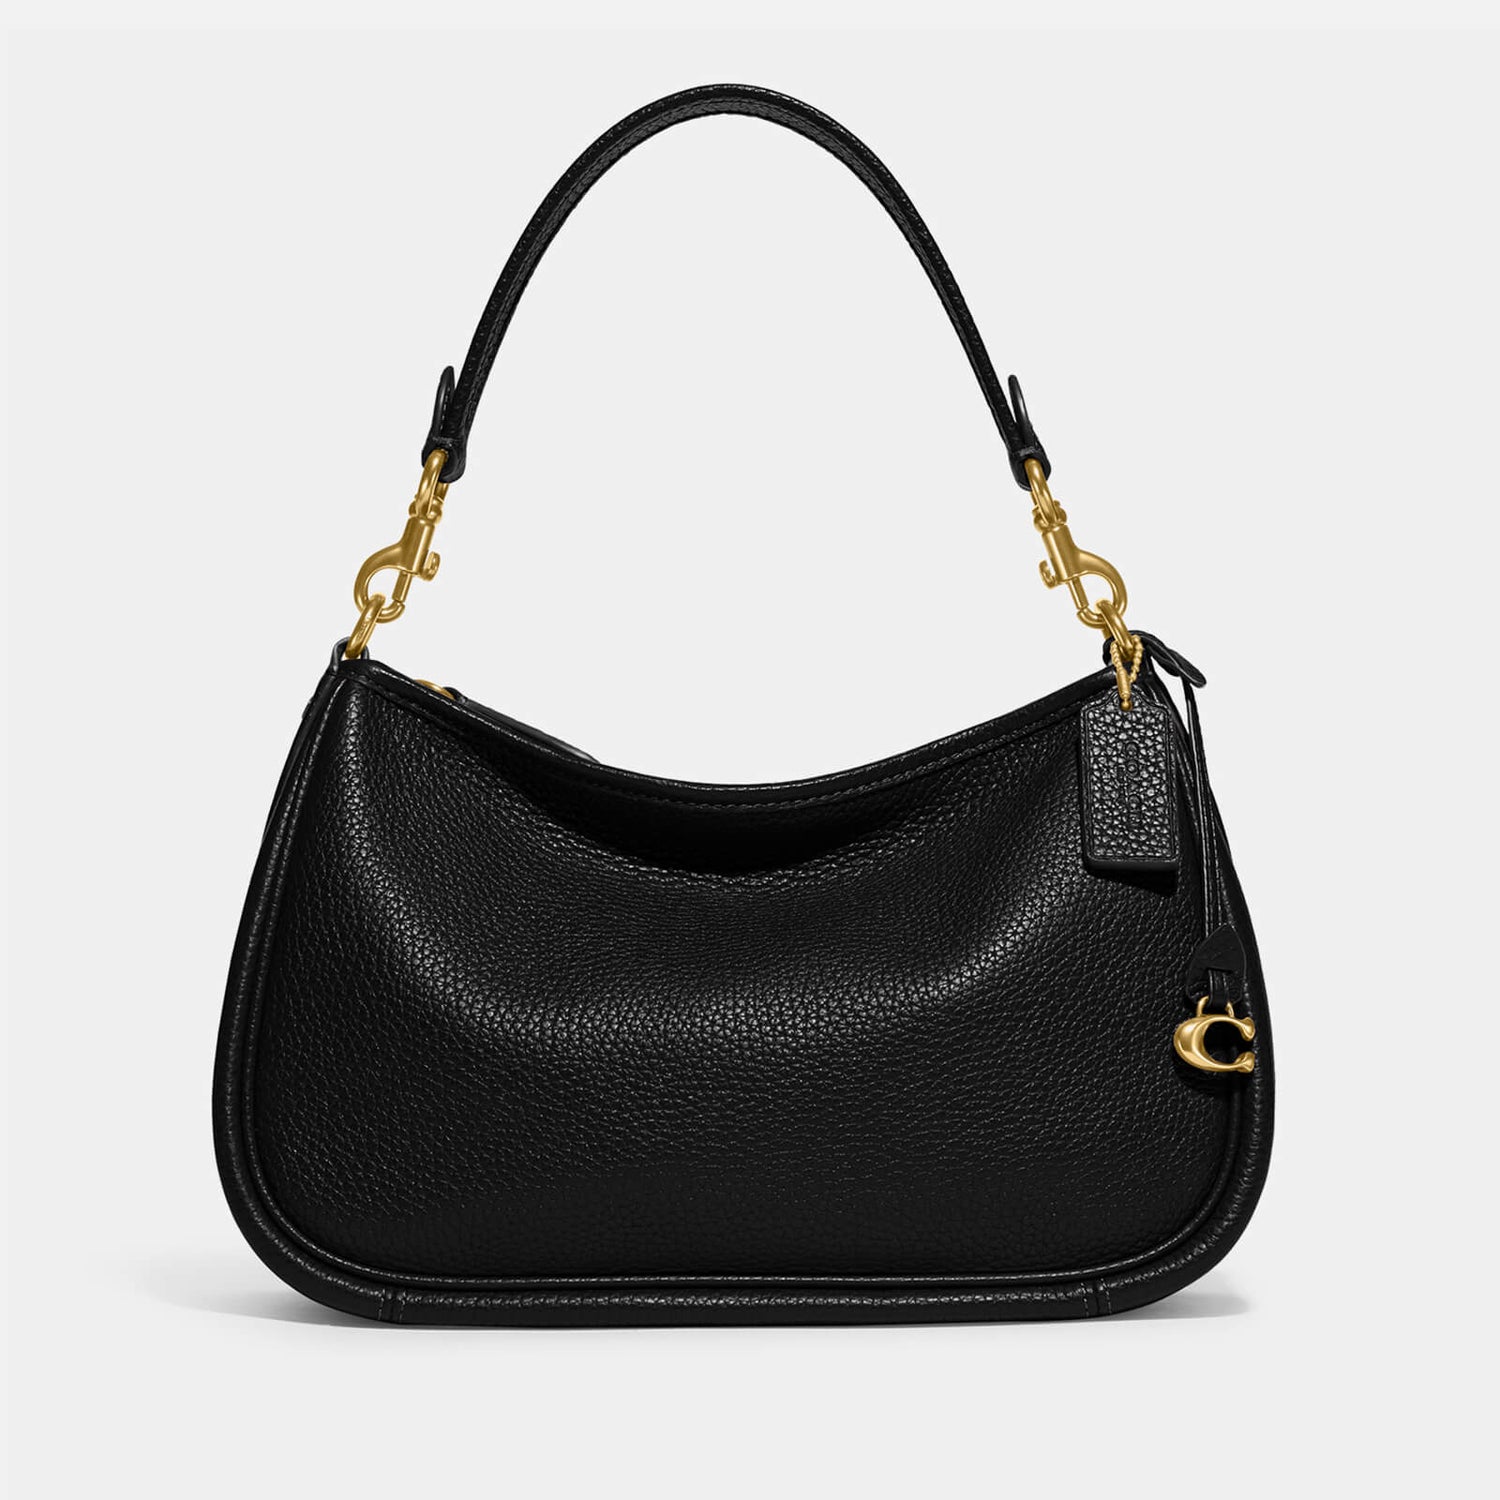 Coach Cary Textured-Leather Shoulder Bag